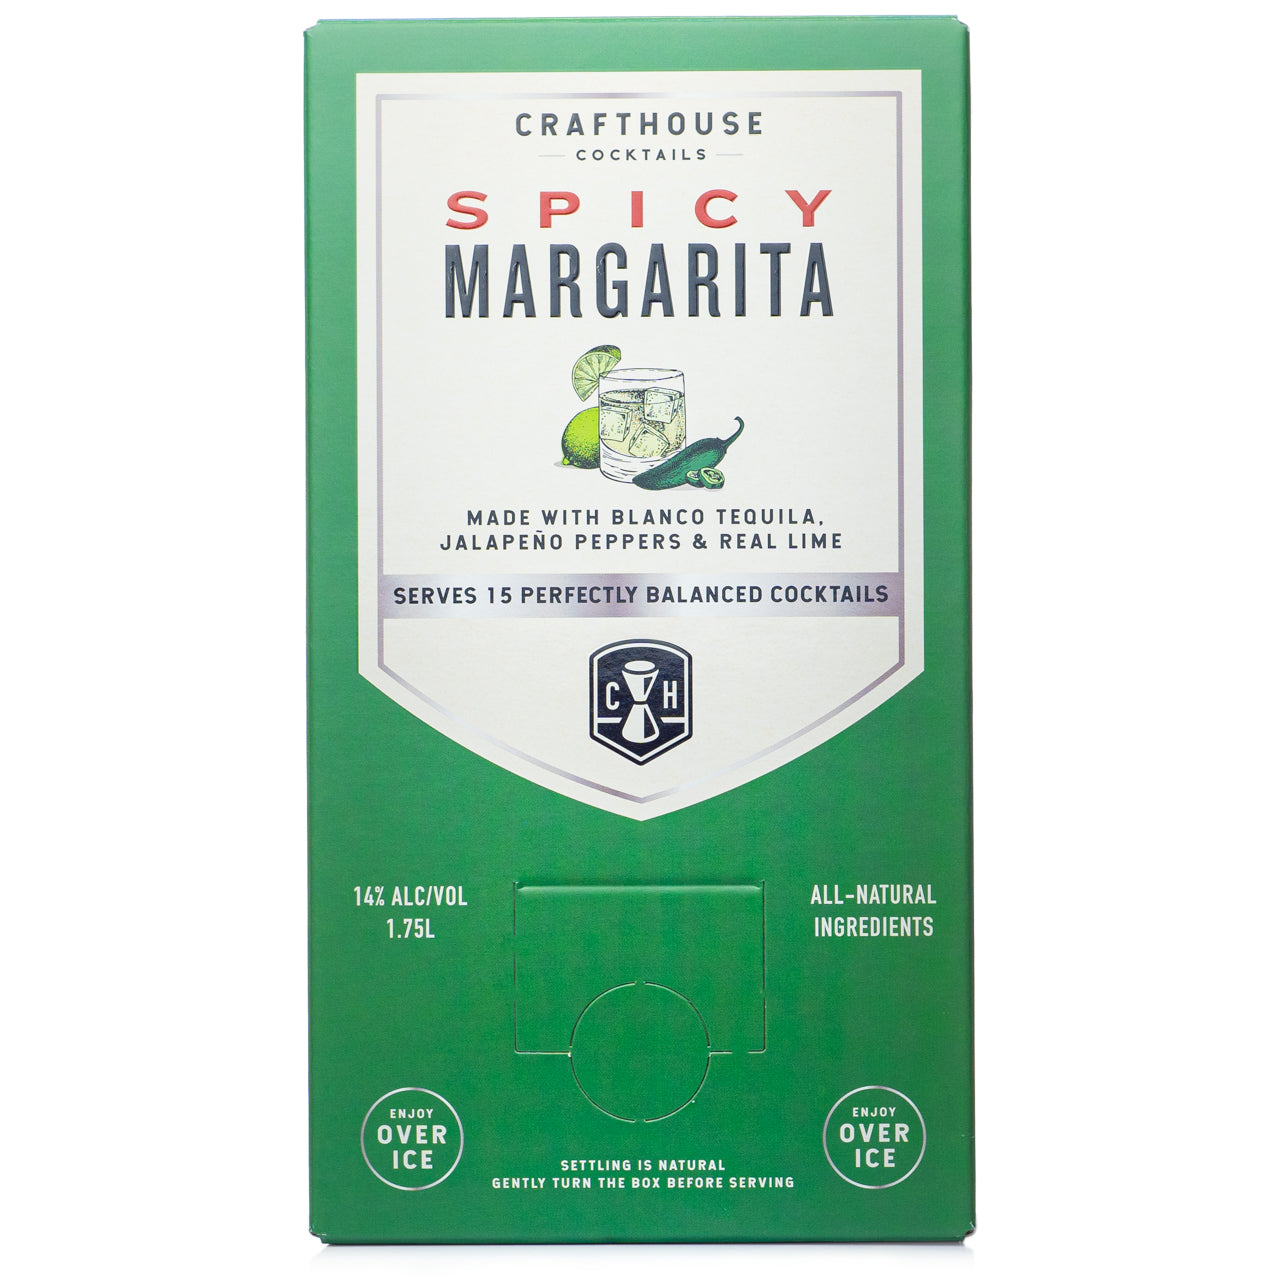 Crafthouse Cocktail Spicy Margarita